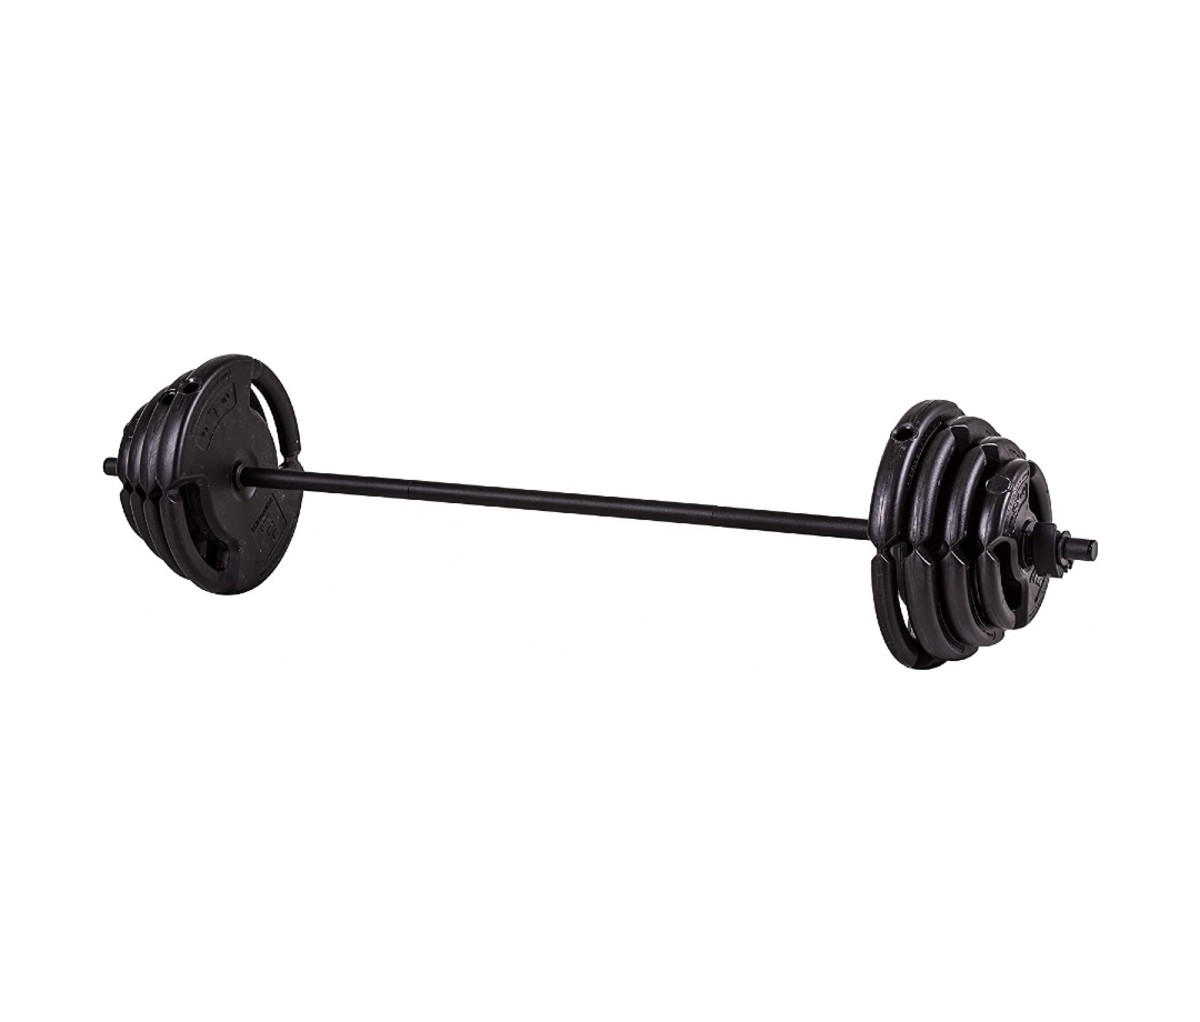 The Step Fitness barbell is great choice for building up your home gym.